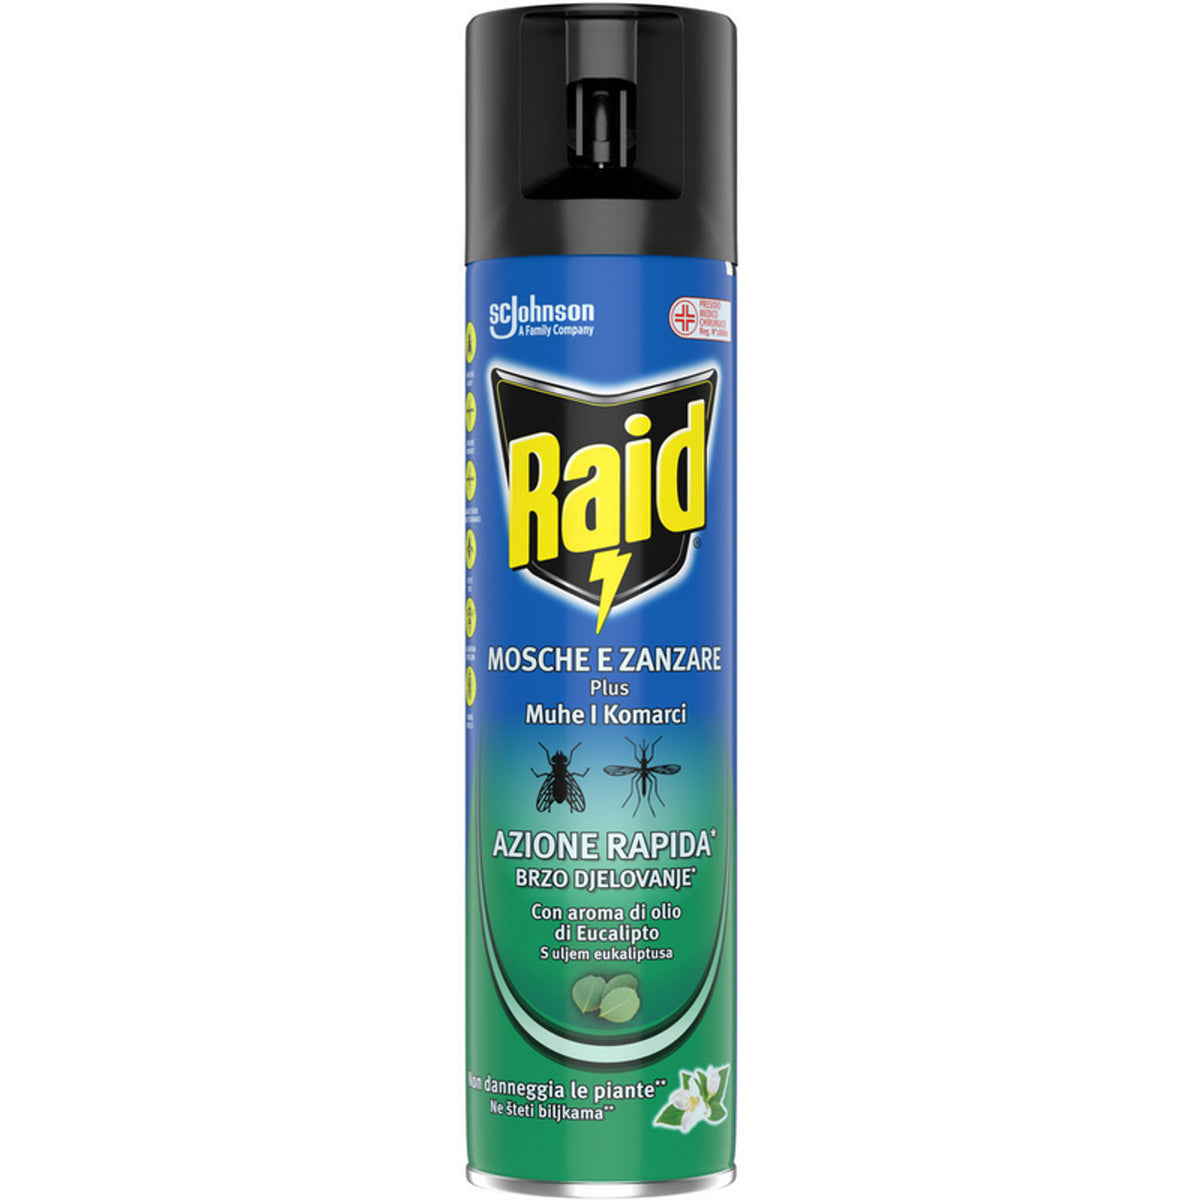 Raid Insecticide spray flies and plus mosquitoes quick action with eucalyptus oil aroma 400 ml